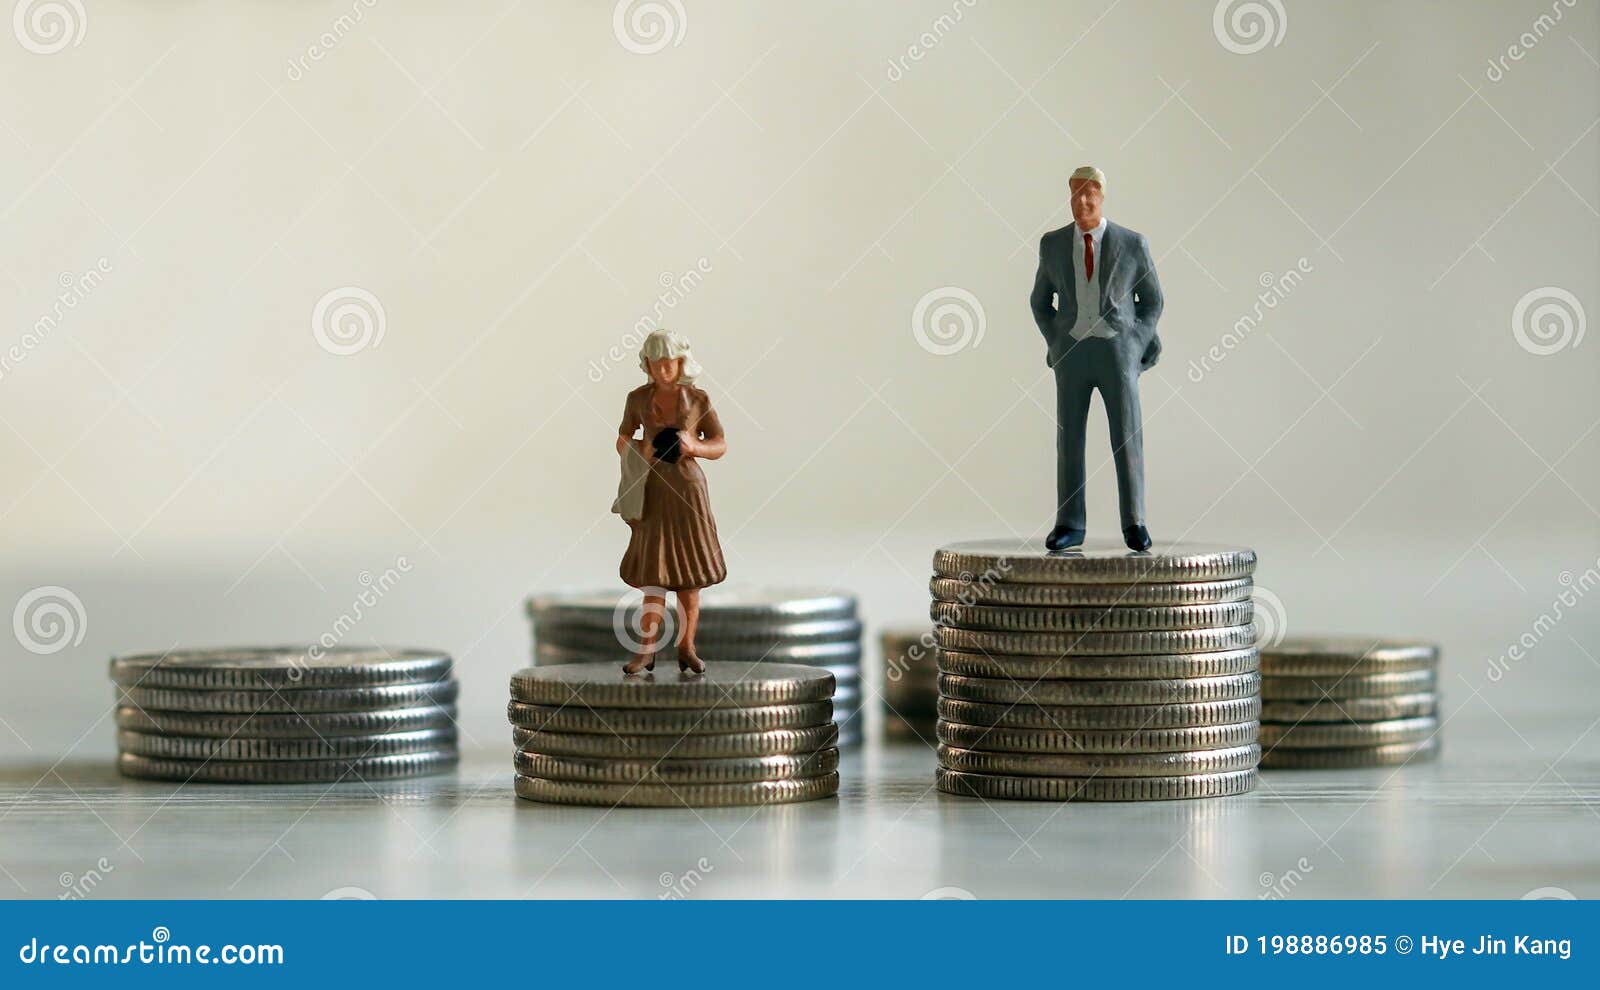 the concept of the gender pay gap.